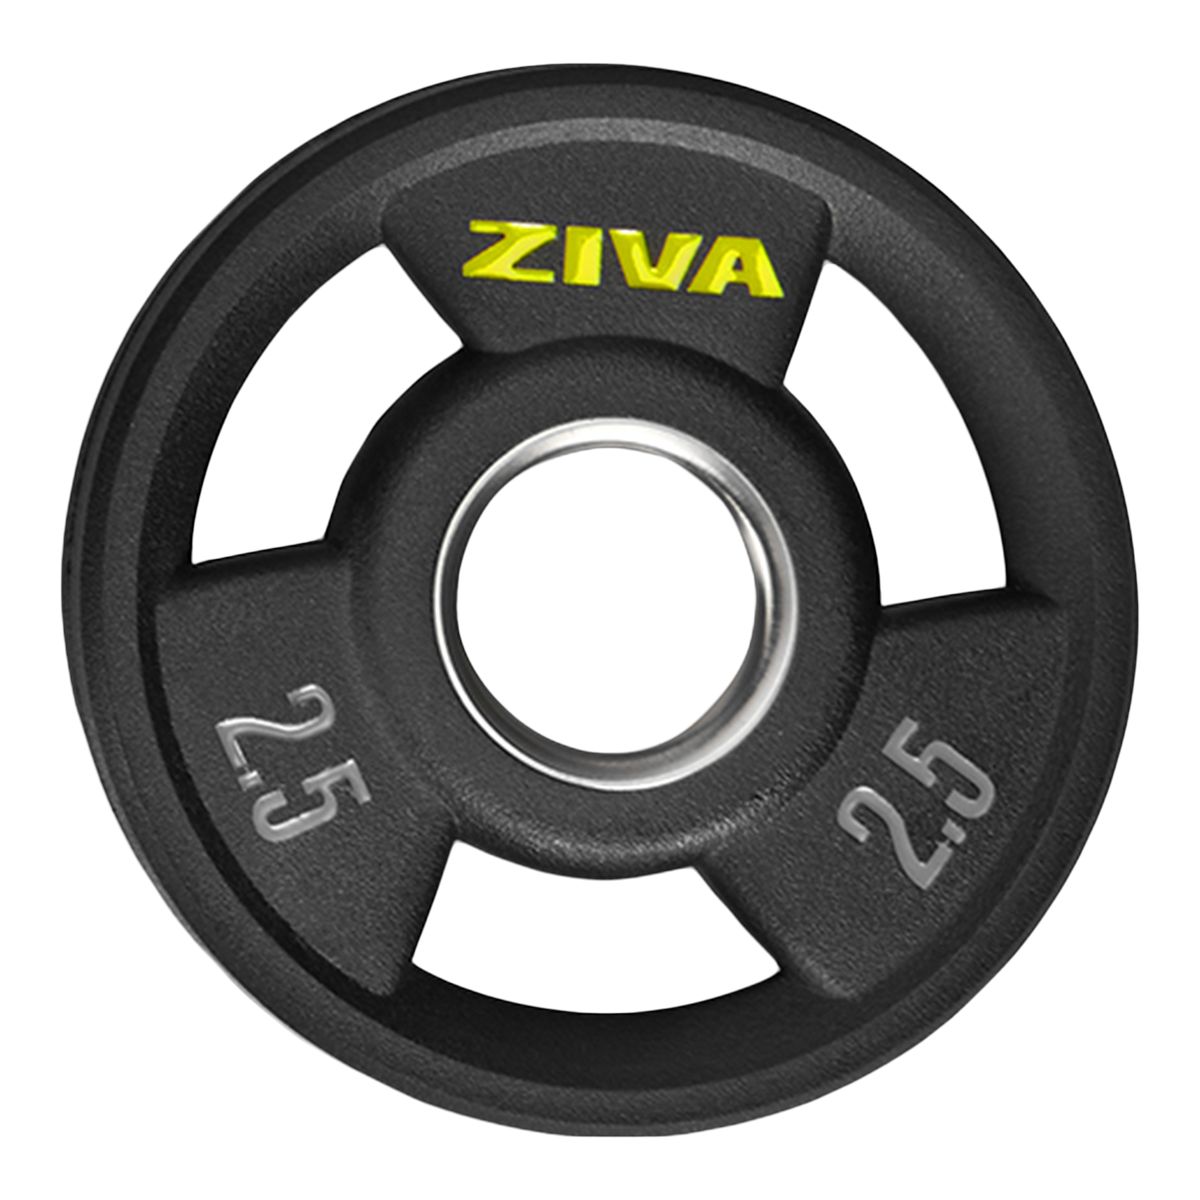 Ziva Performance Rubber Grip lb Weight Disc Weight Home Gym